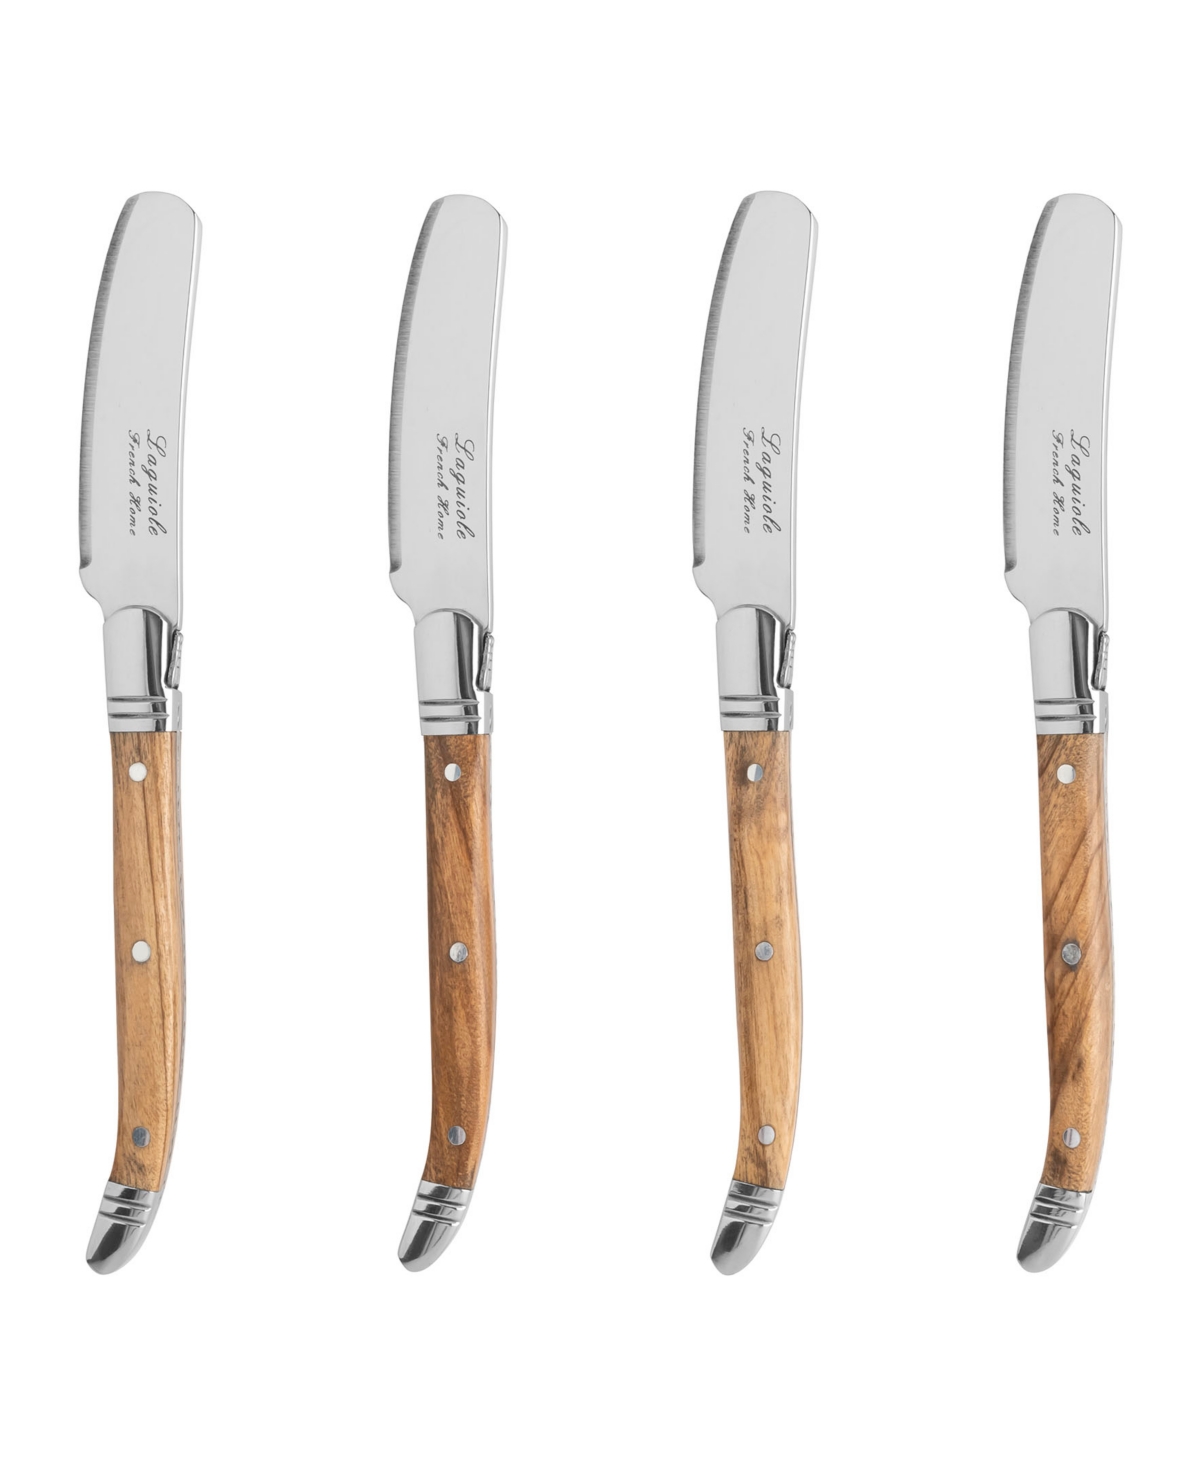 Shop French Home Connoisseur Laguiole Set Of 4 Spreaders With Olive Wood Handles